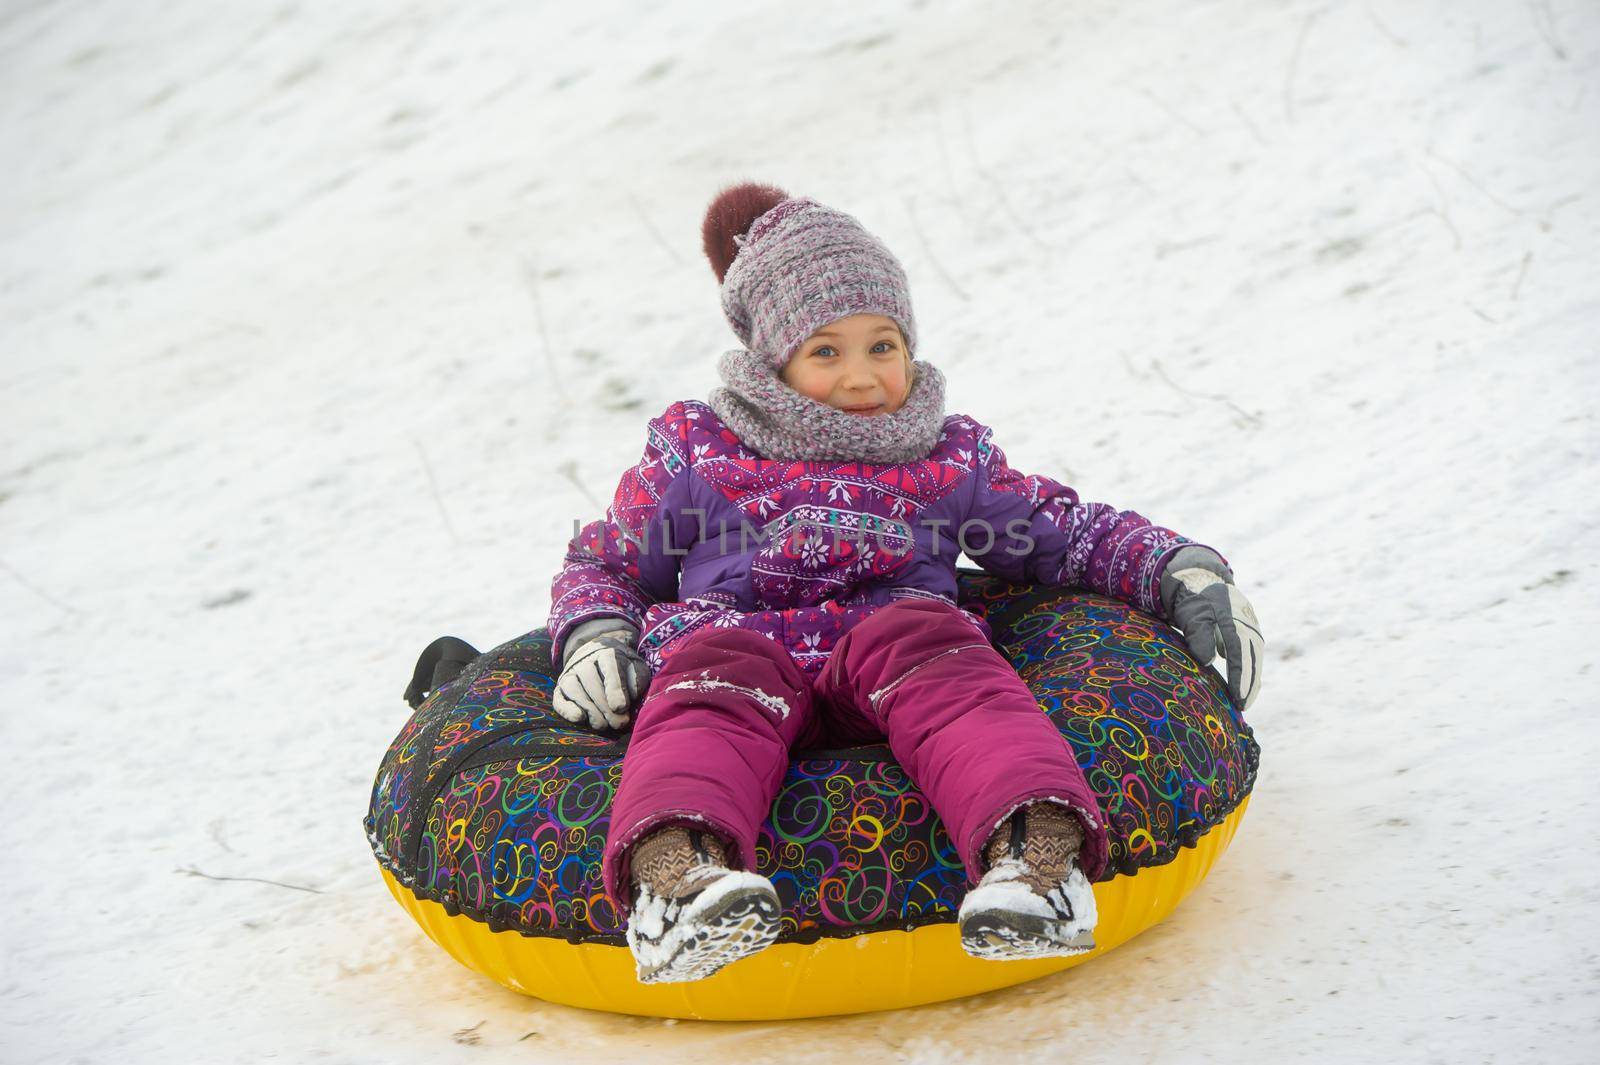 a little girl in winter in purple clothes and an inflatable circle rides down the hill on the street.